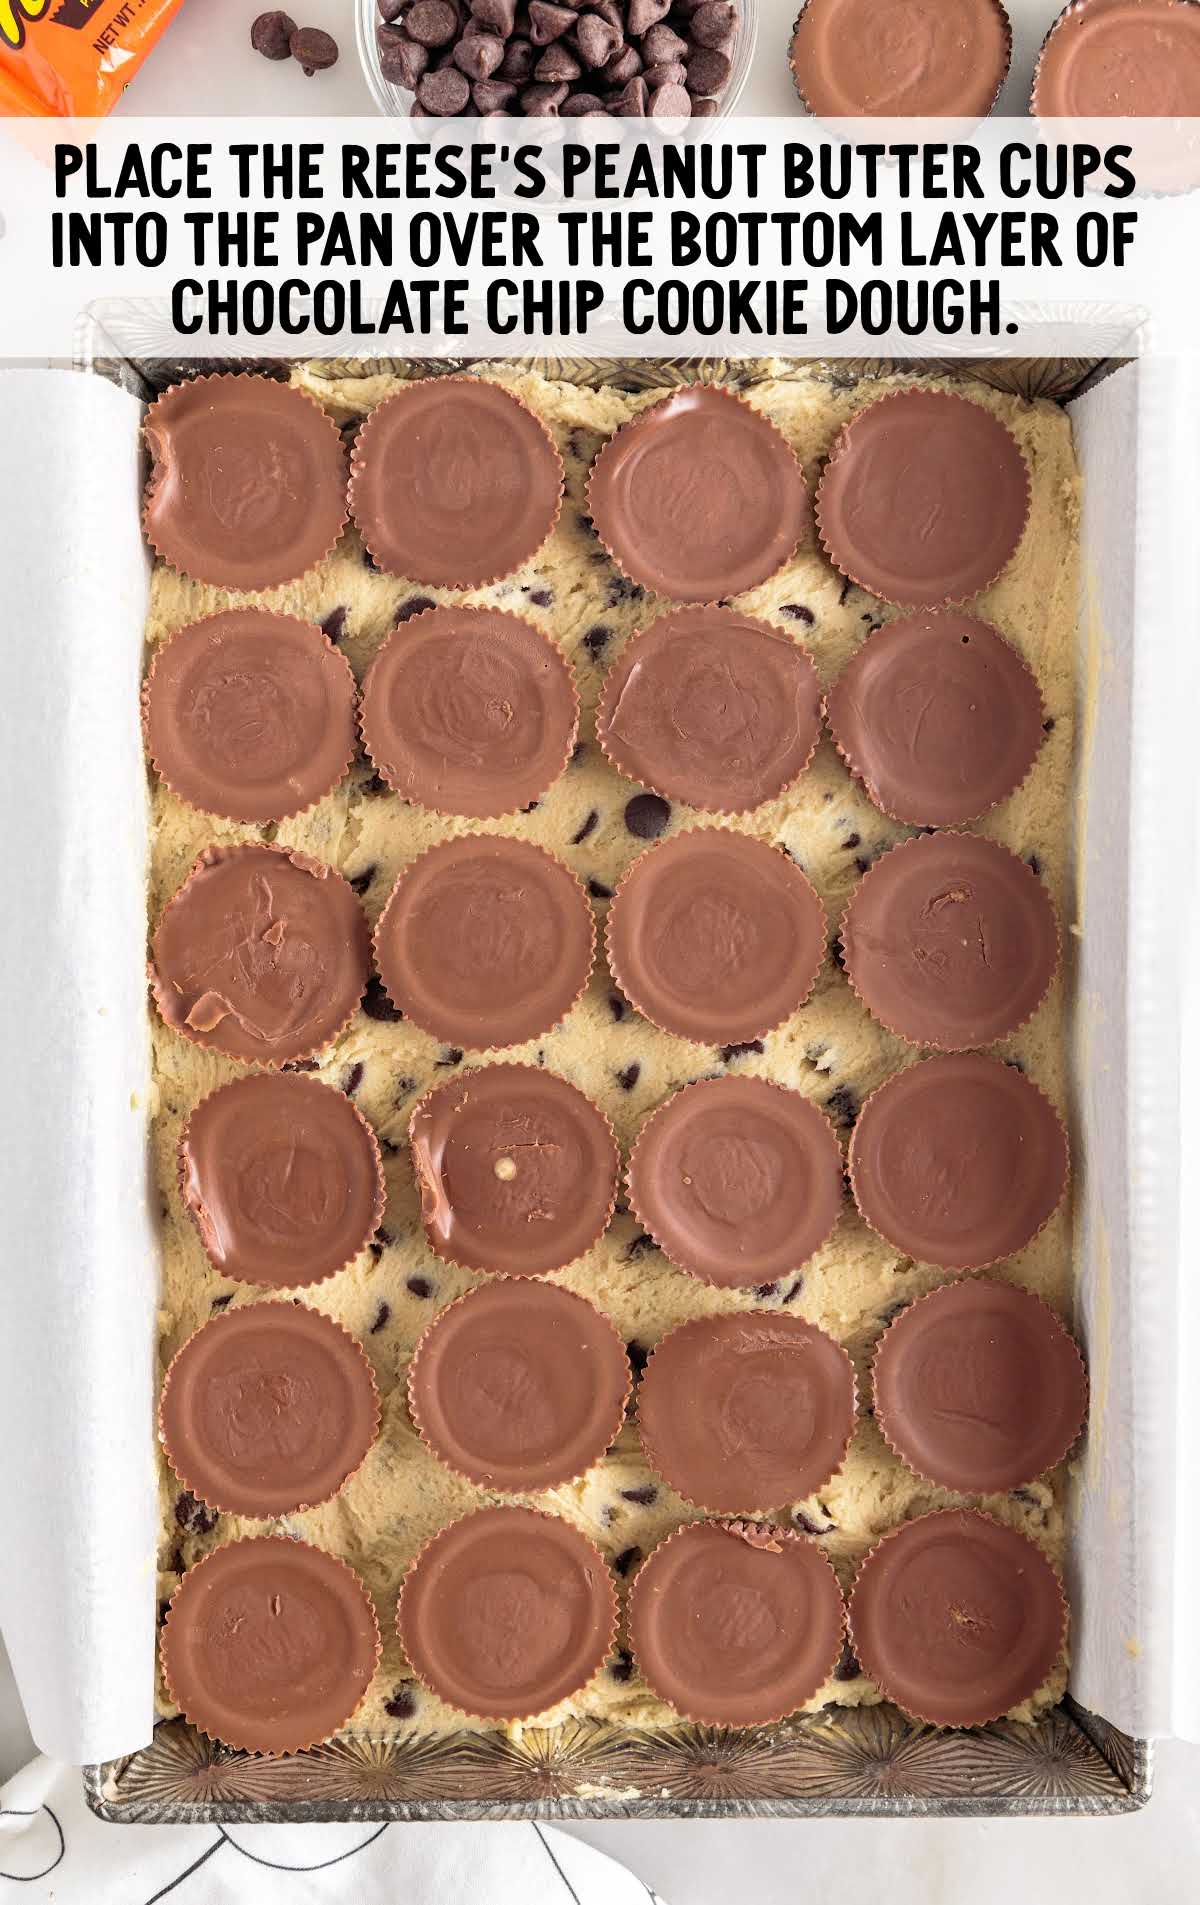 Reese's peanut butter cups placed into the bottom of a pan